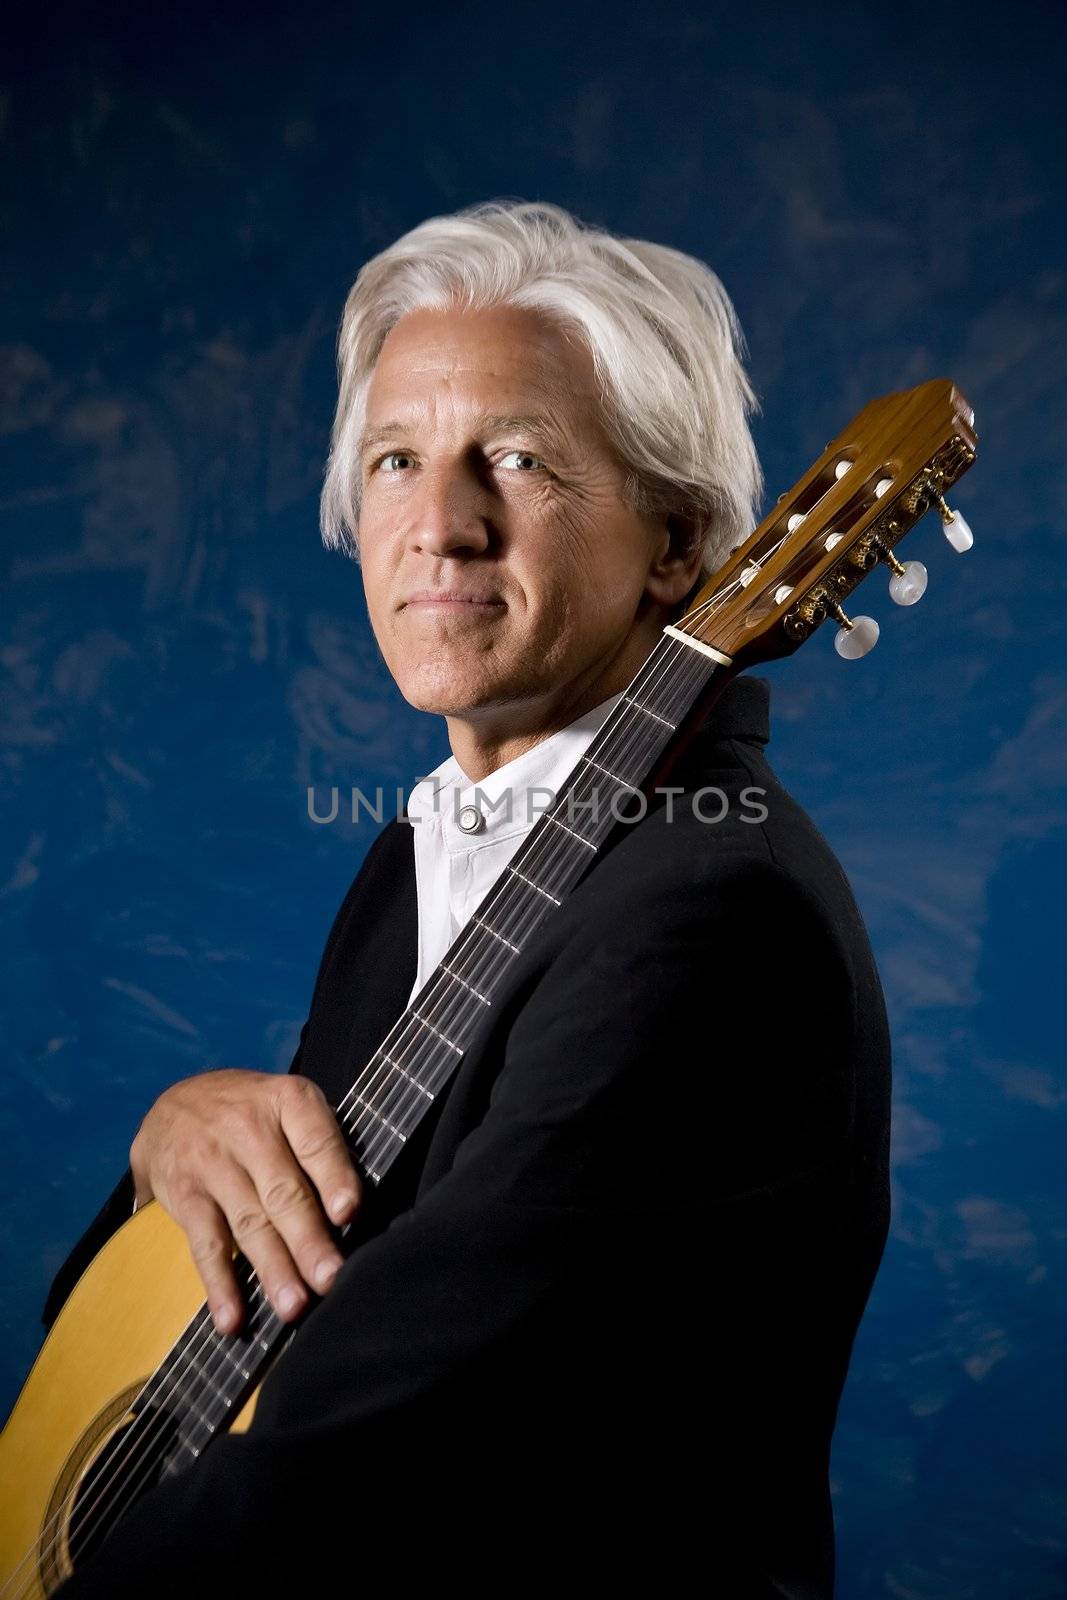 Classical Guitarist with his Instrument in front of a Blue Wall